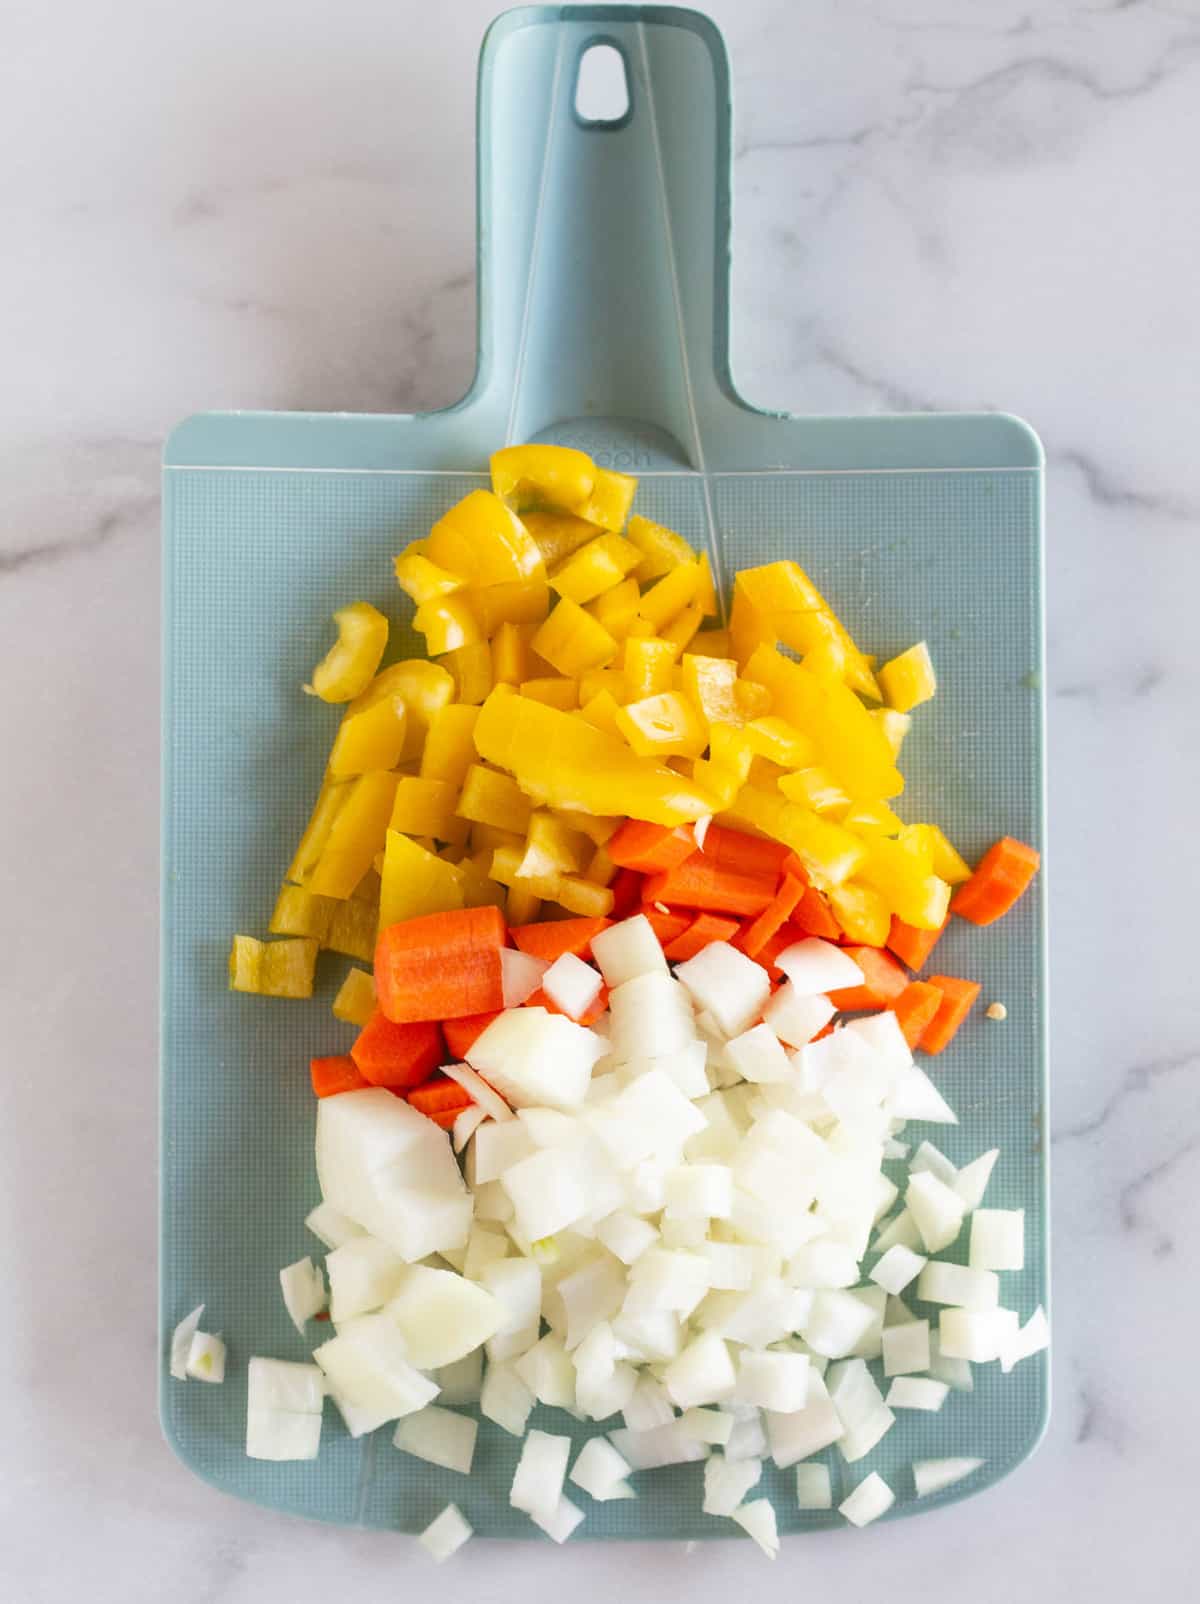 chopped onion, carrot and bell pepper on cutting board